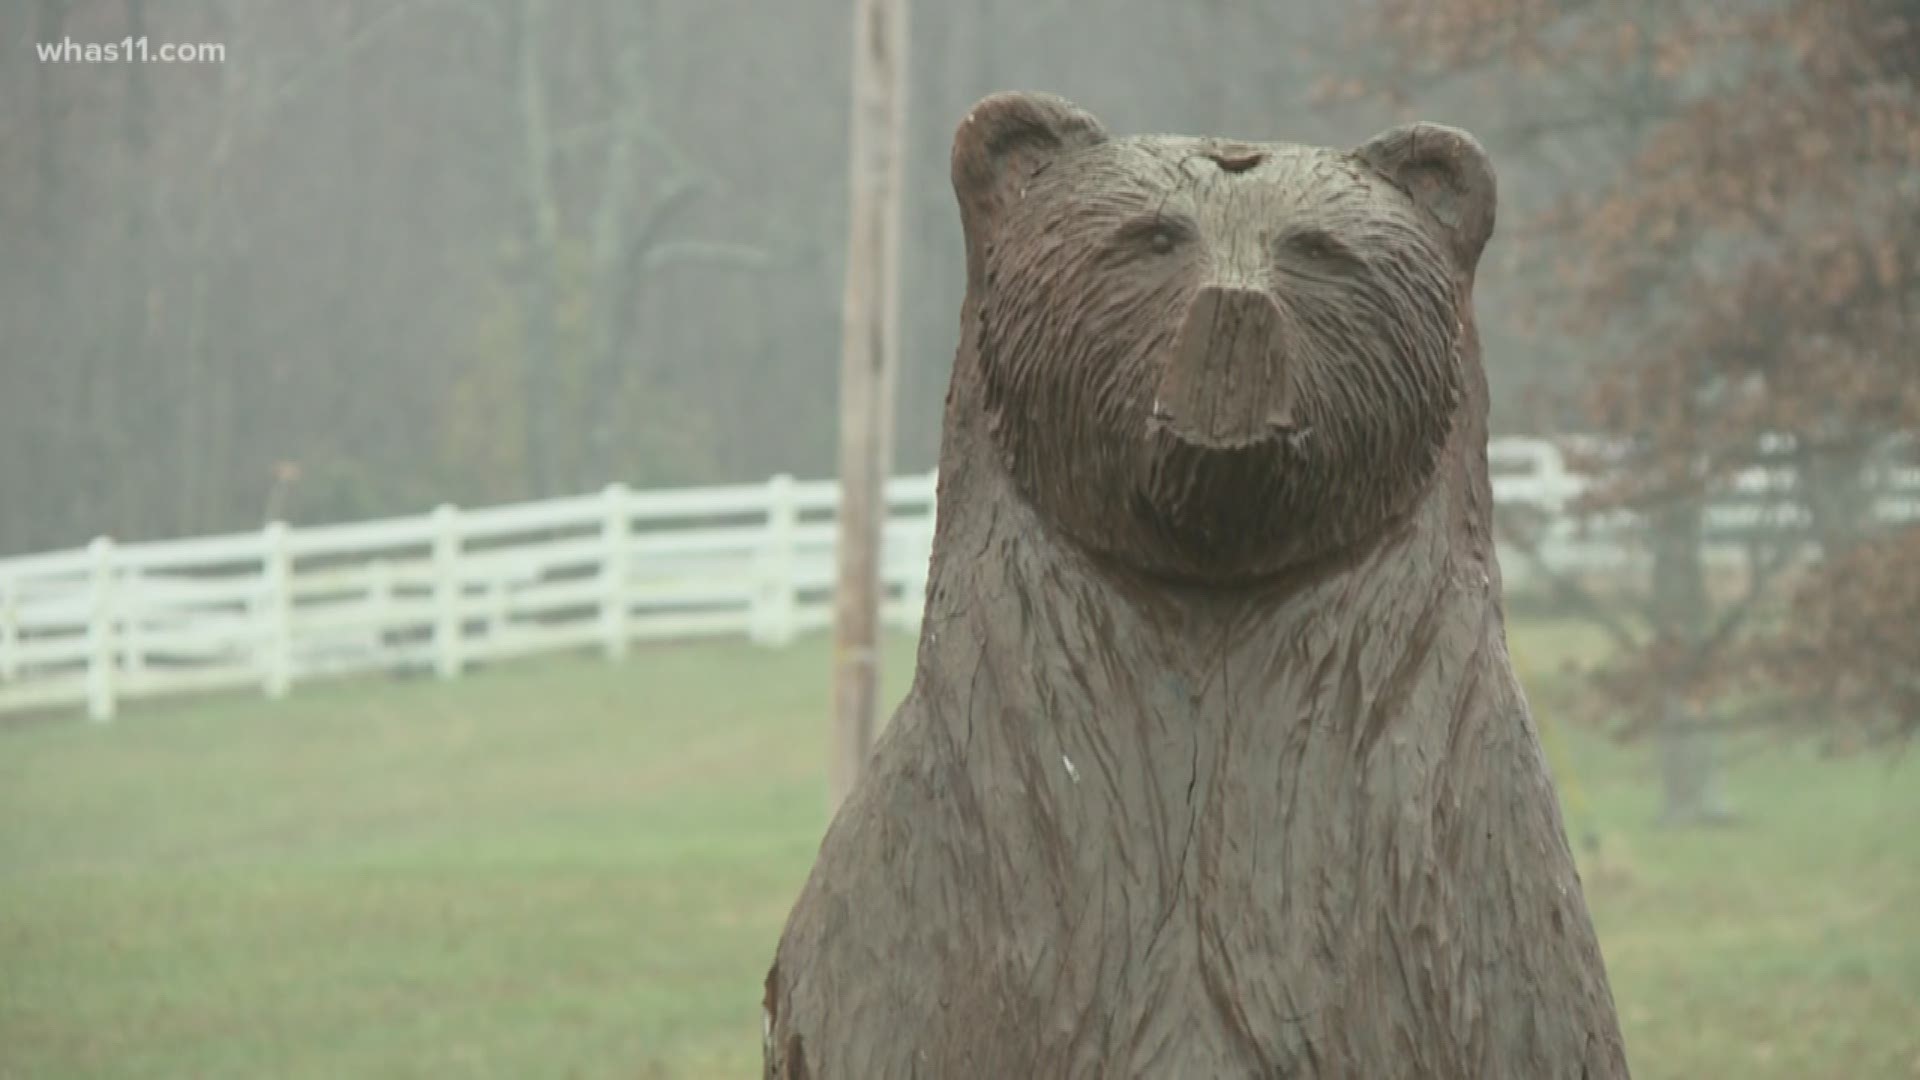 The bear was hit on I-64. Fish and Wildlife is now searching for the bear.